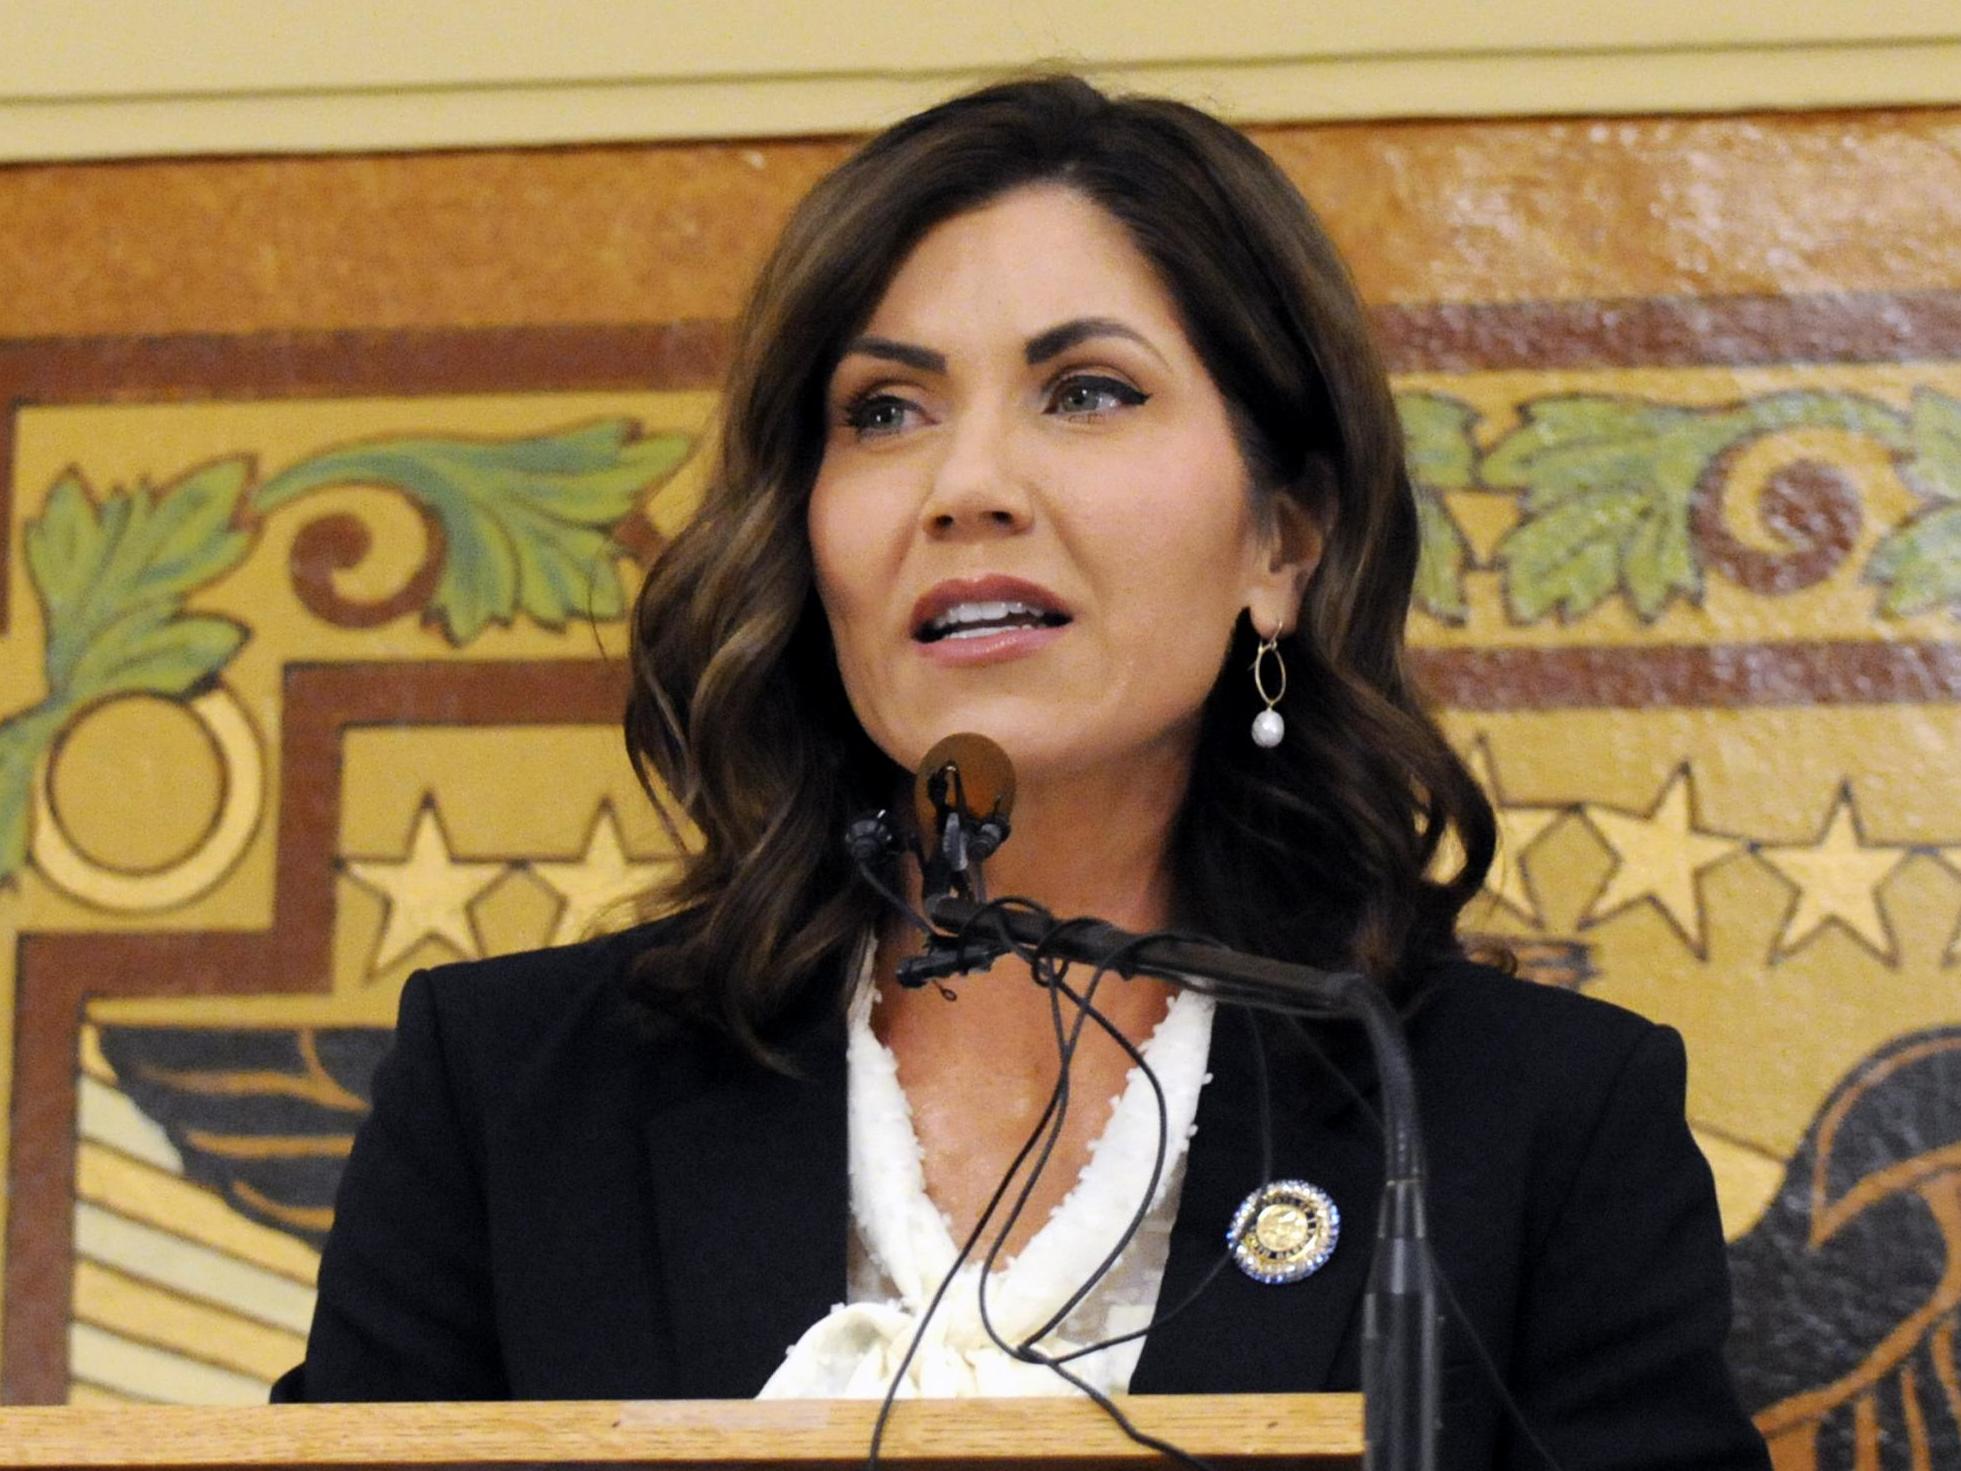 Governor Kristi Noem issued letters to two Sioux tribes for their coronavirus travel checkpoints